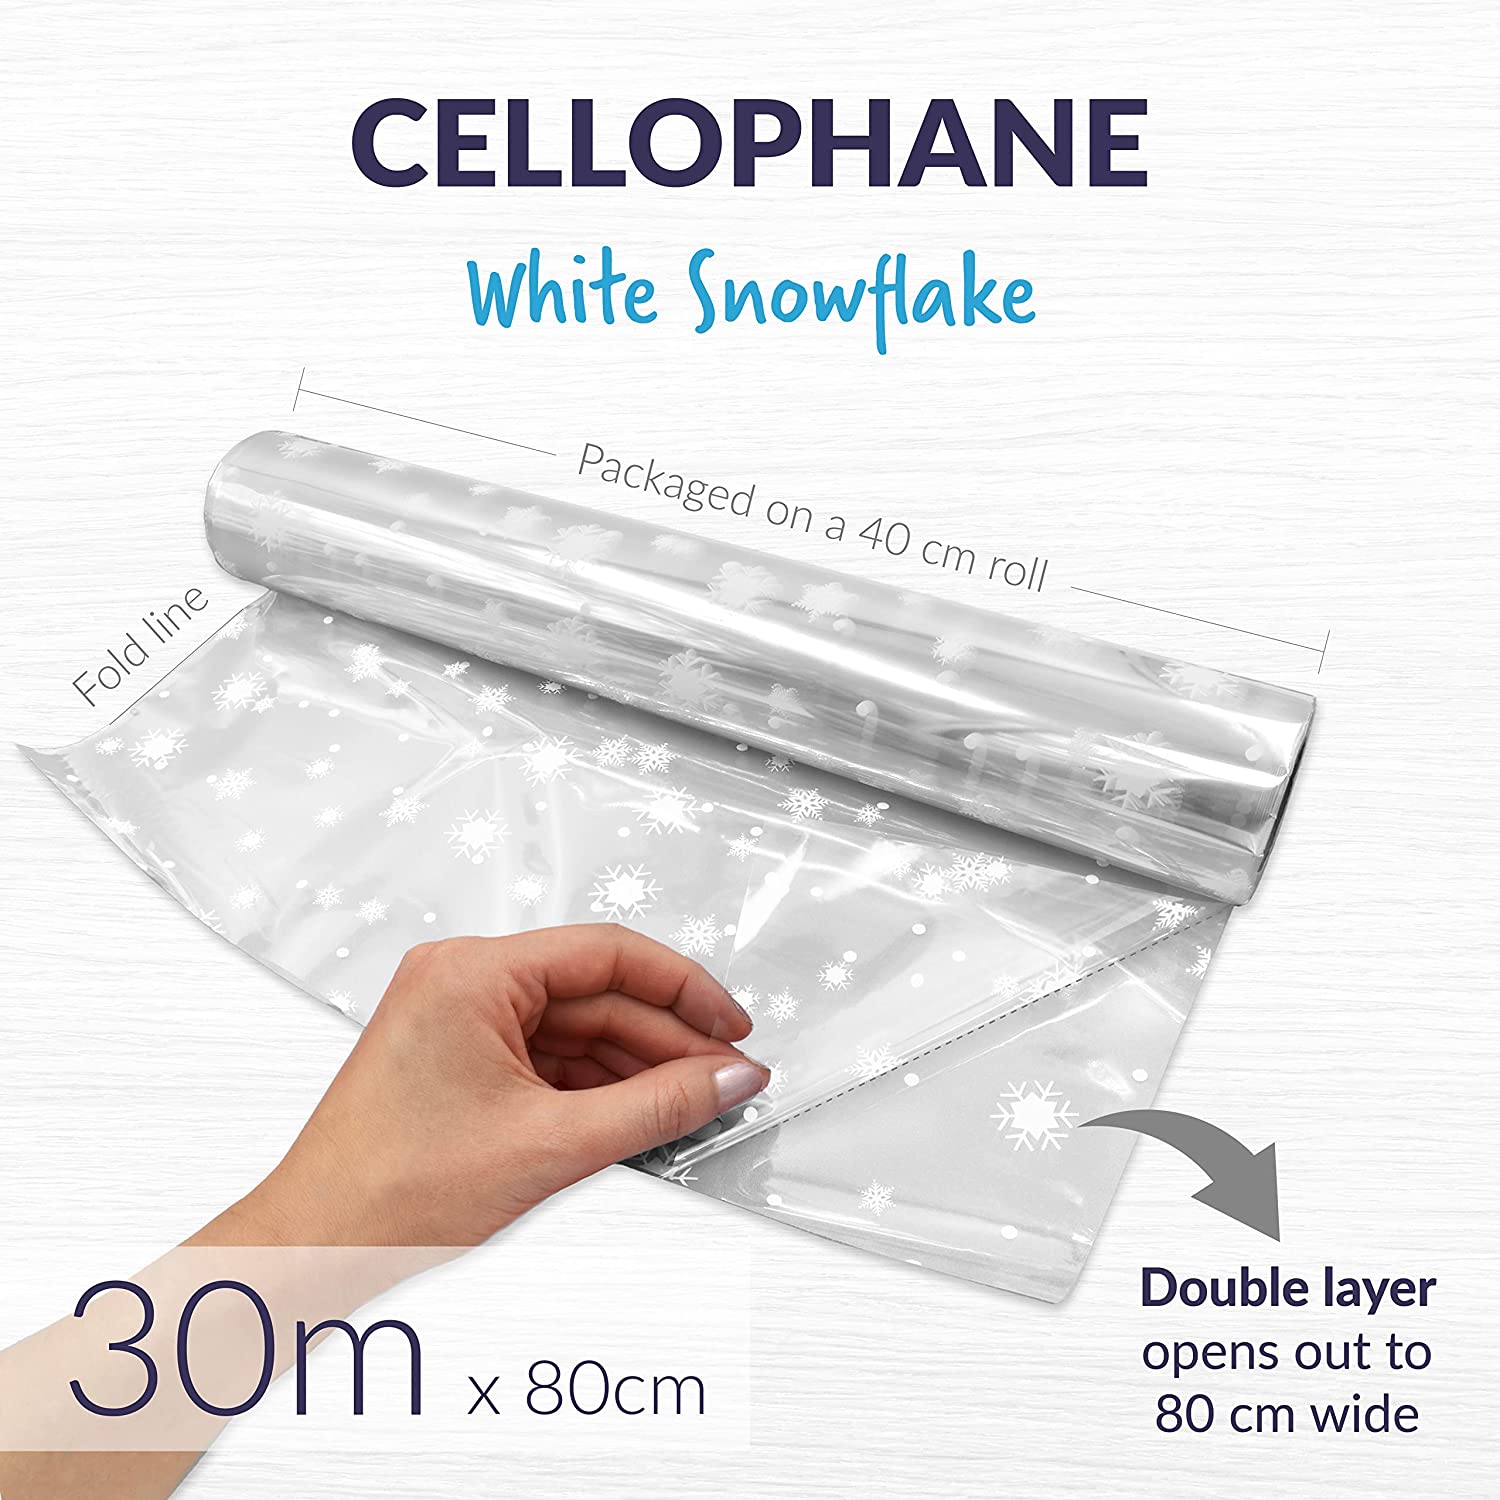 Cellophane Wrap Product Feature